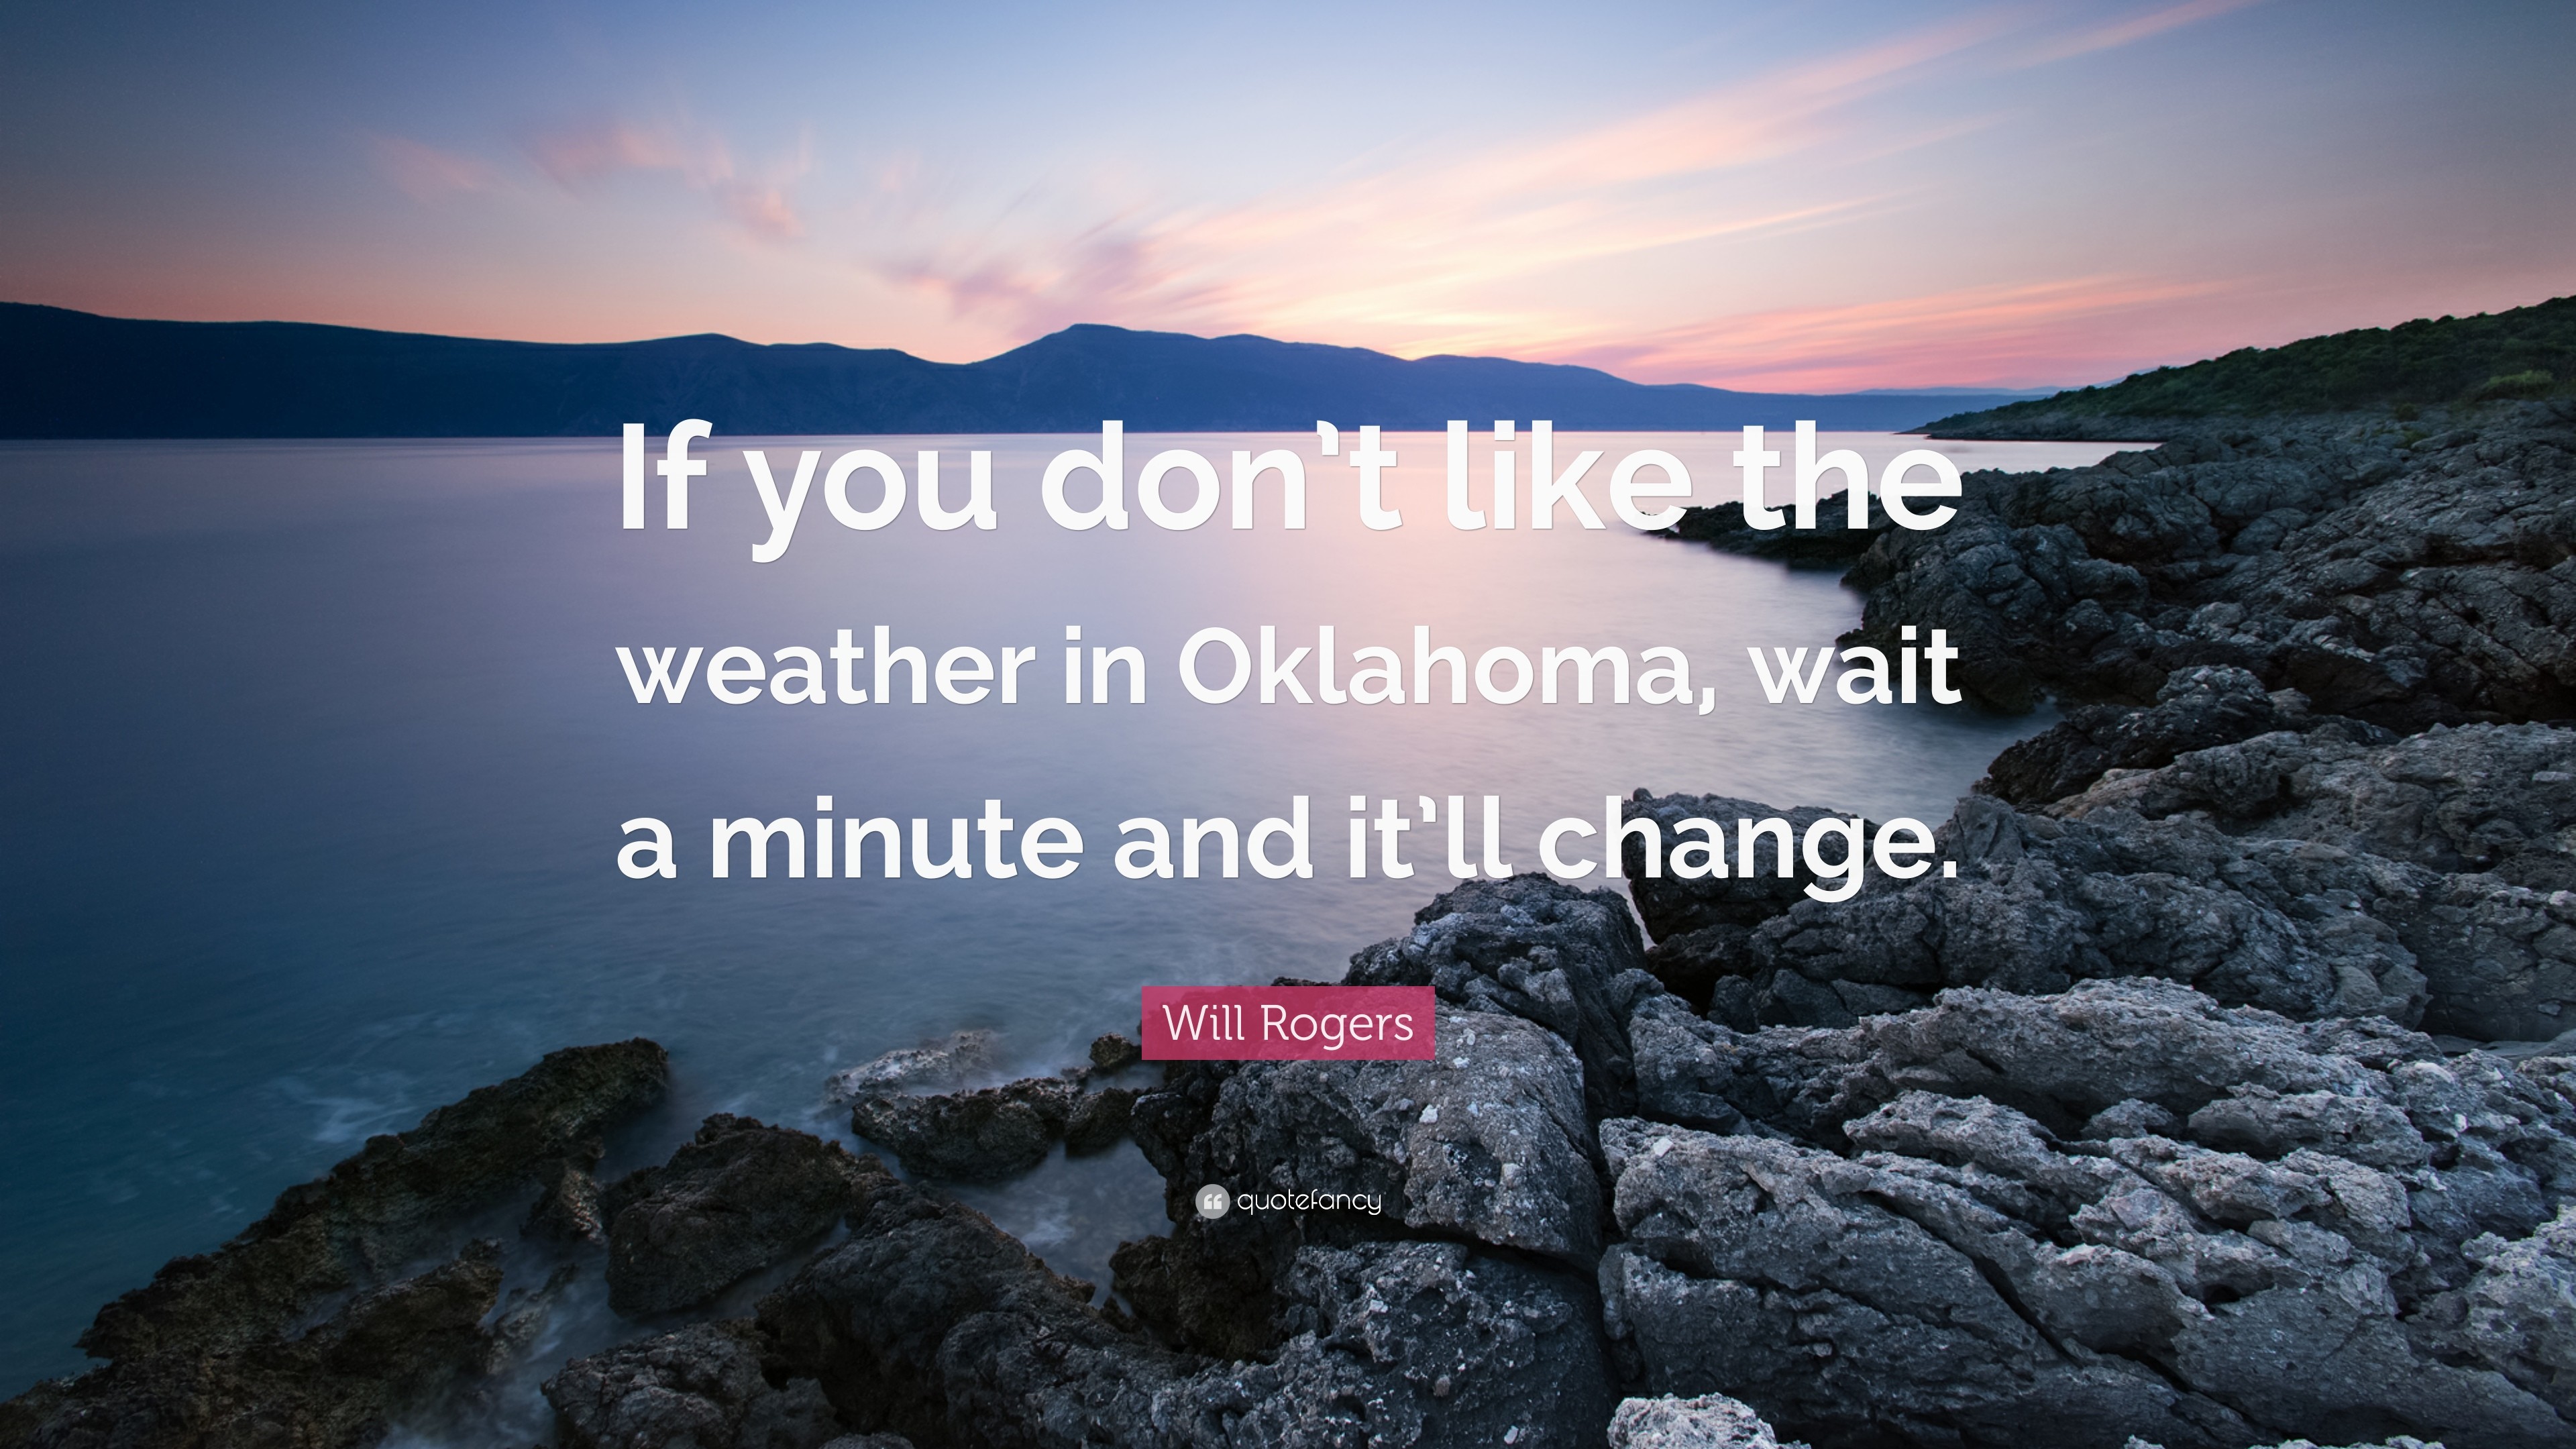 3840x2160 Will Rogers Quote: “If you don't like the weather in Oklahoma,